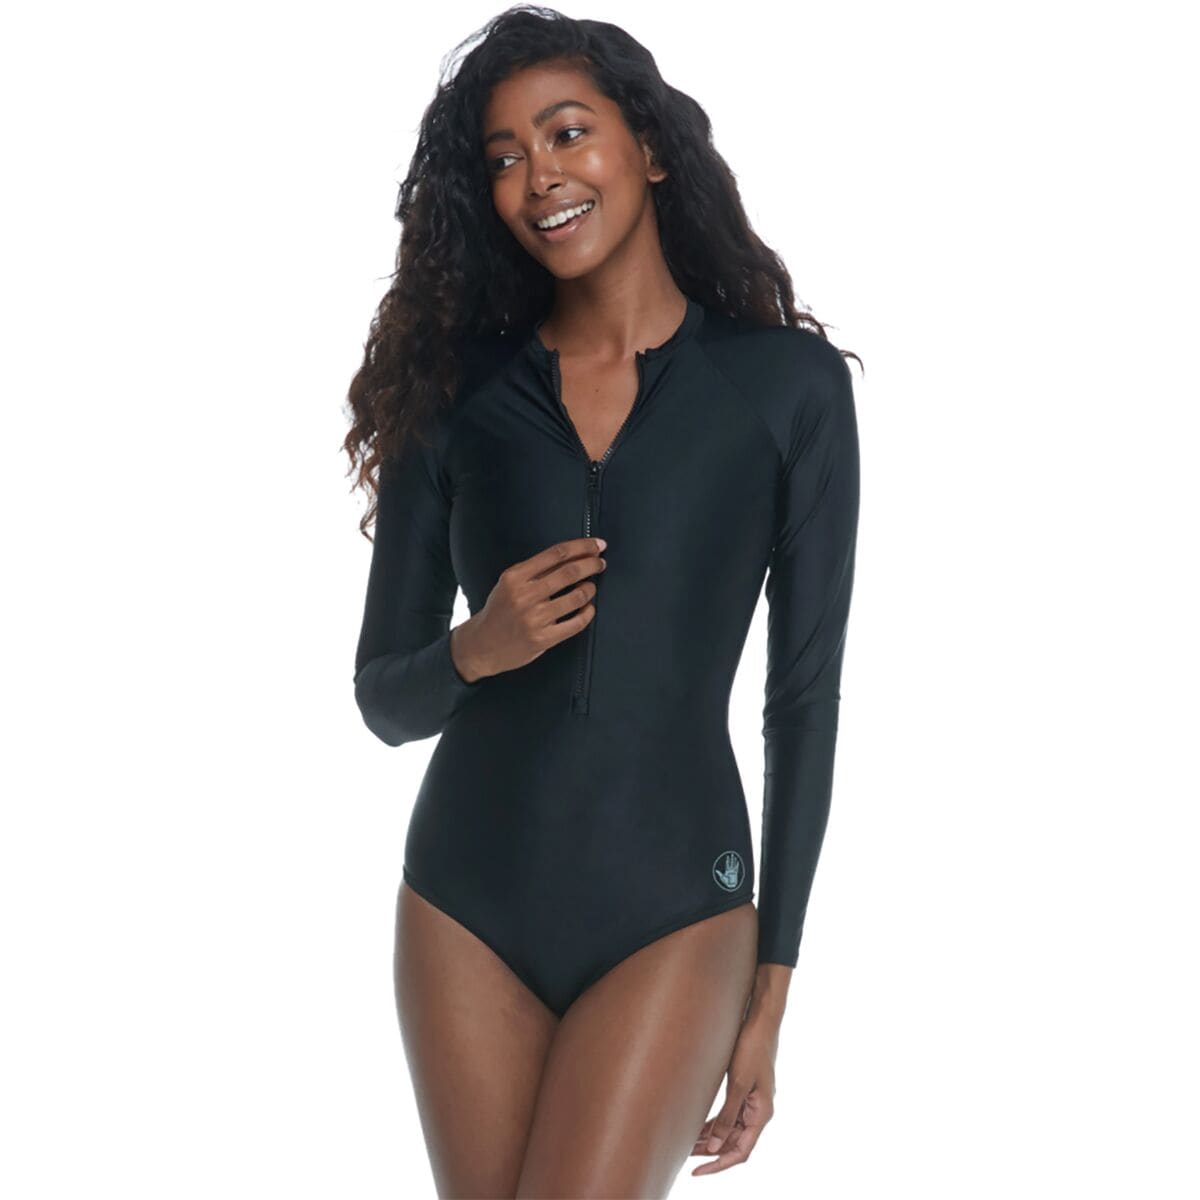 Body Glove Smoothies Chanel Paddle Suit - Women's